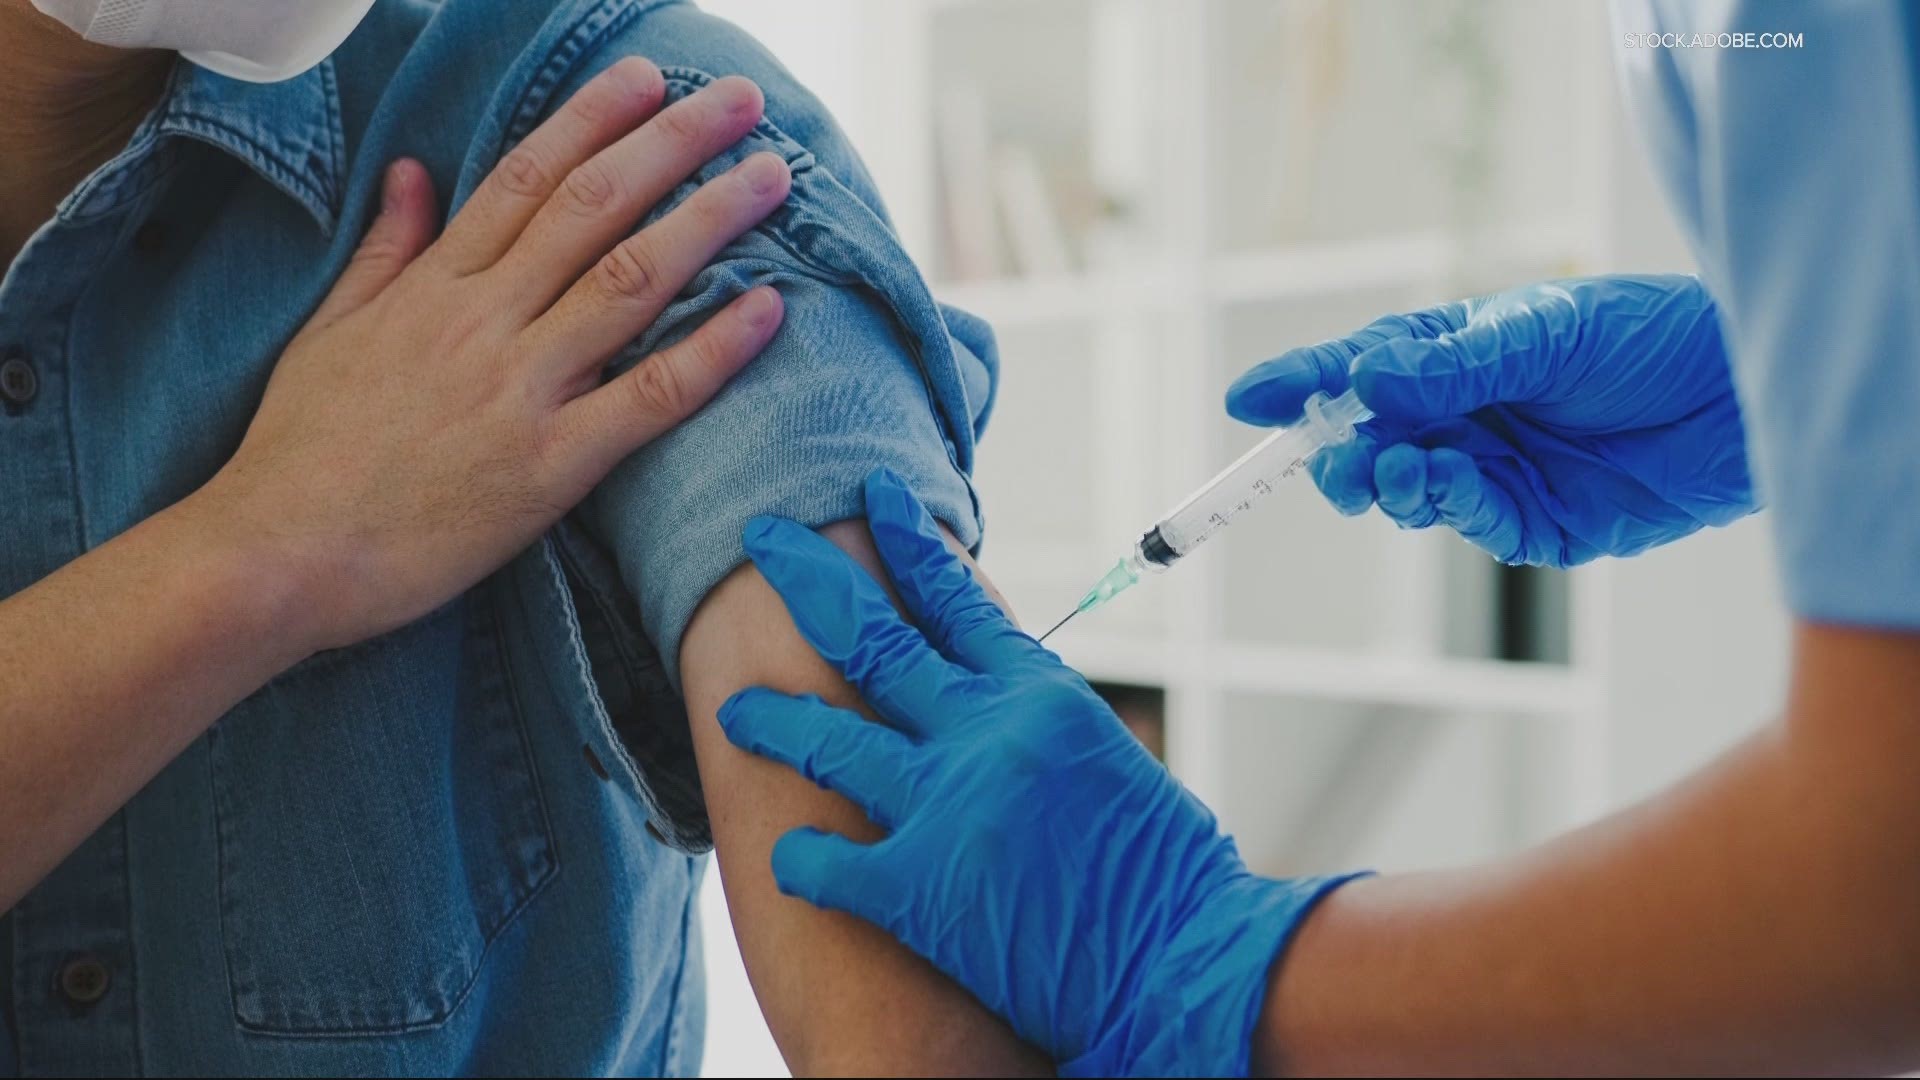 What should you do if you received the Johnson & Johnson vaccine? Galen Ettlin explains.